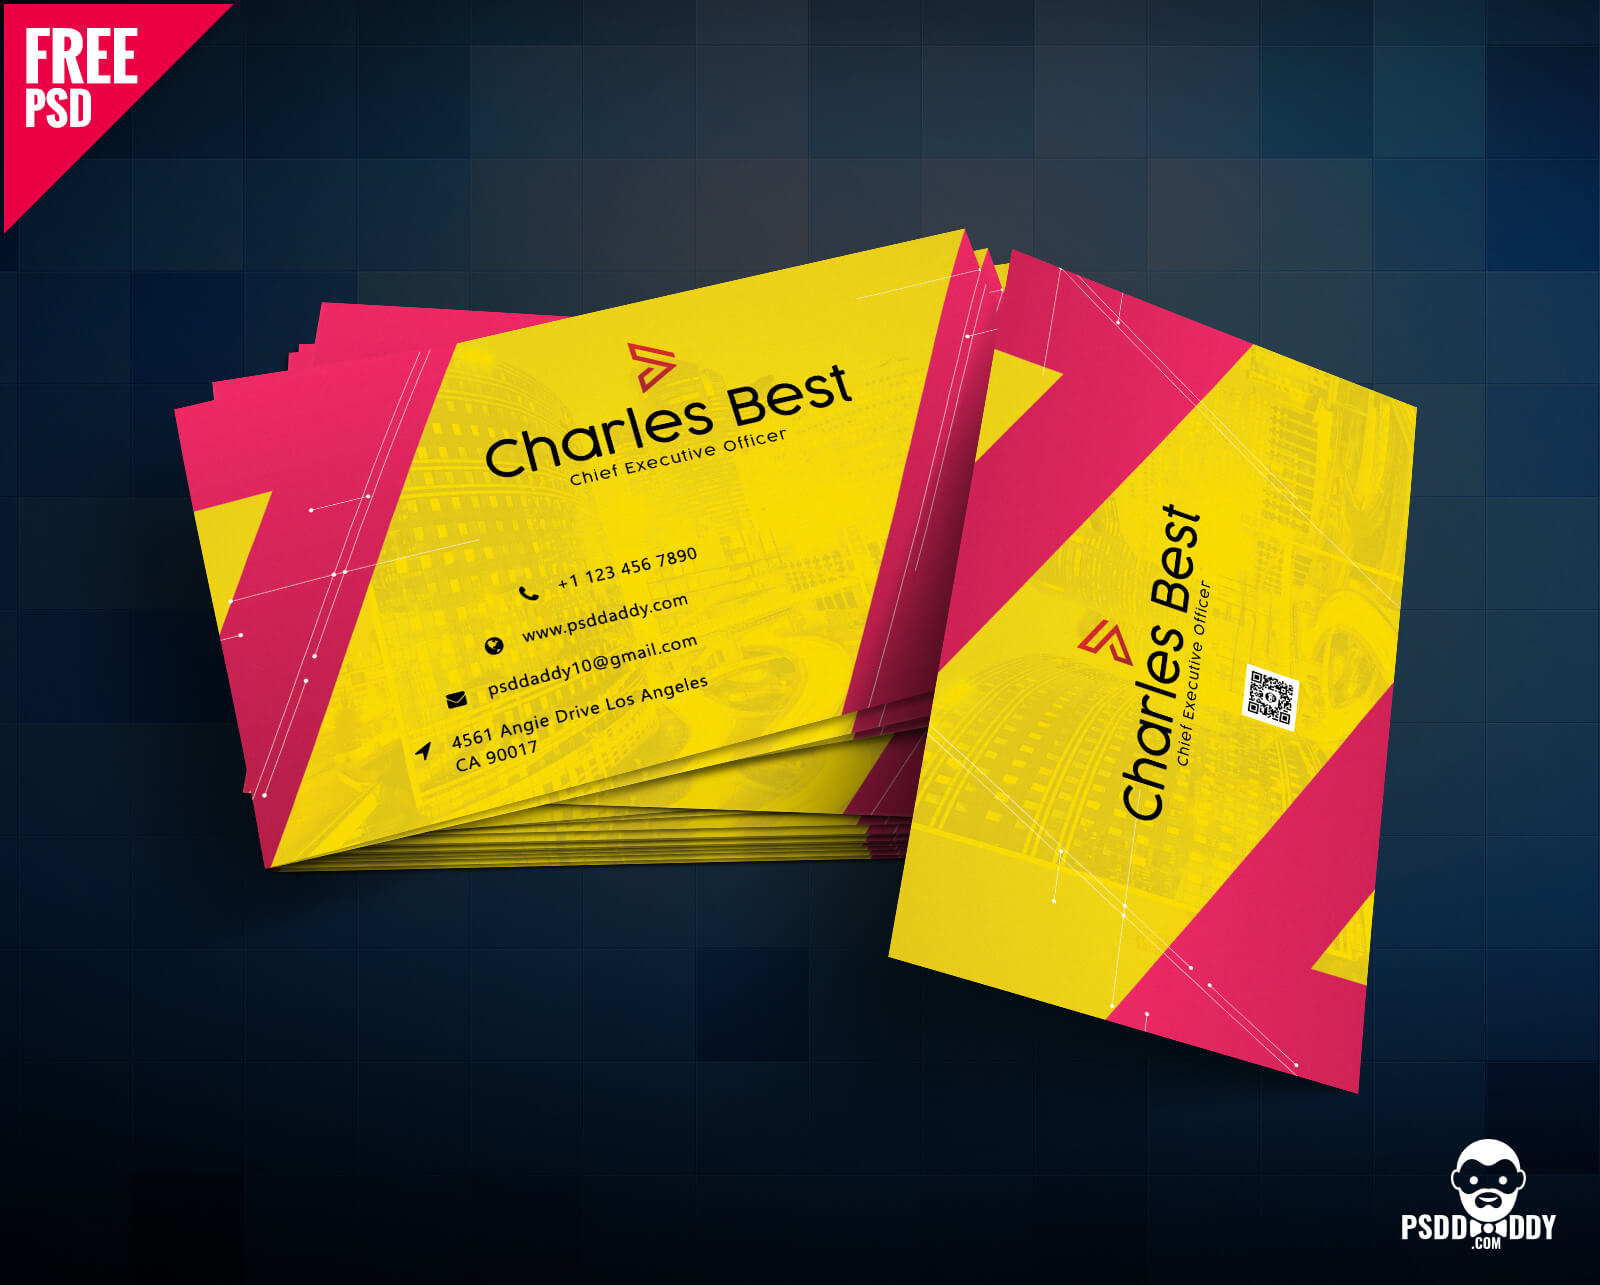 Download] Creative Business Card Free Psd | Psddaddy With Name Card Photoshop Template